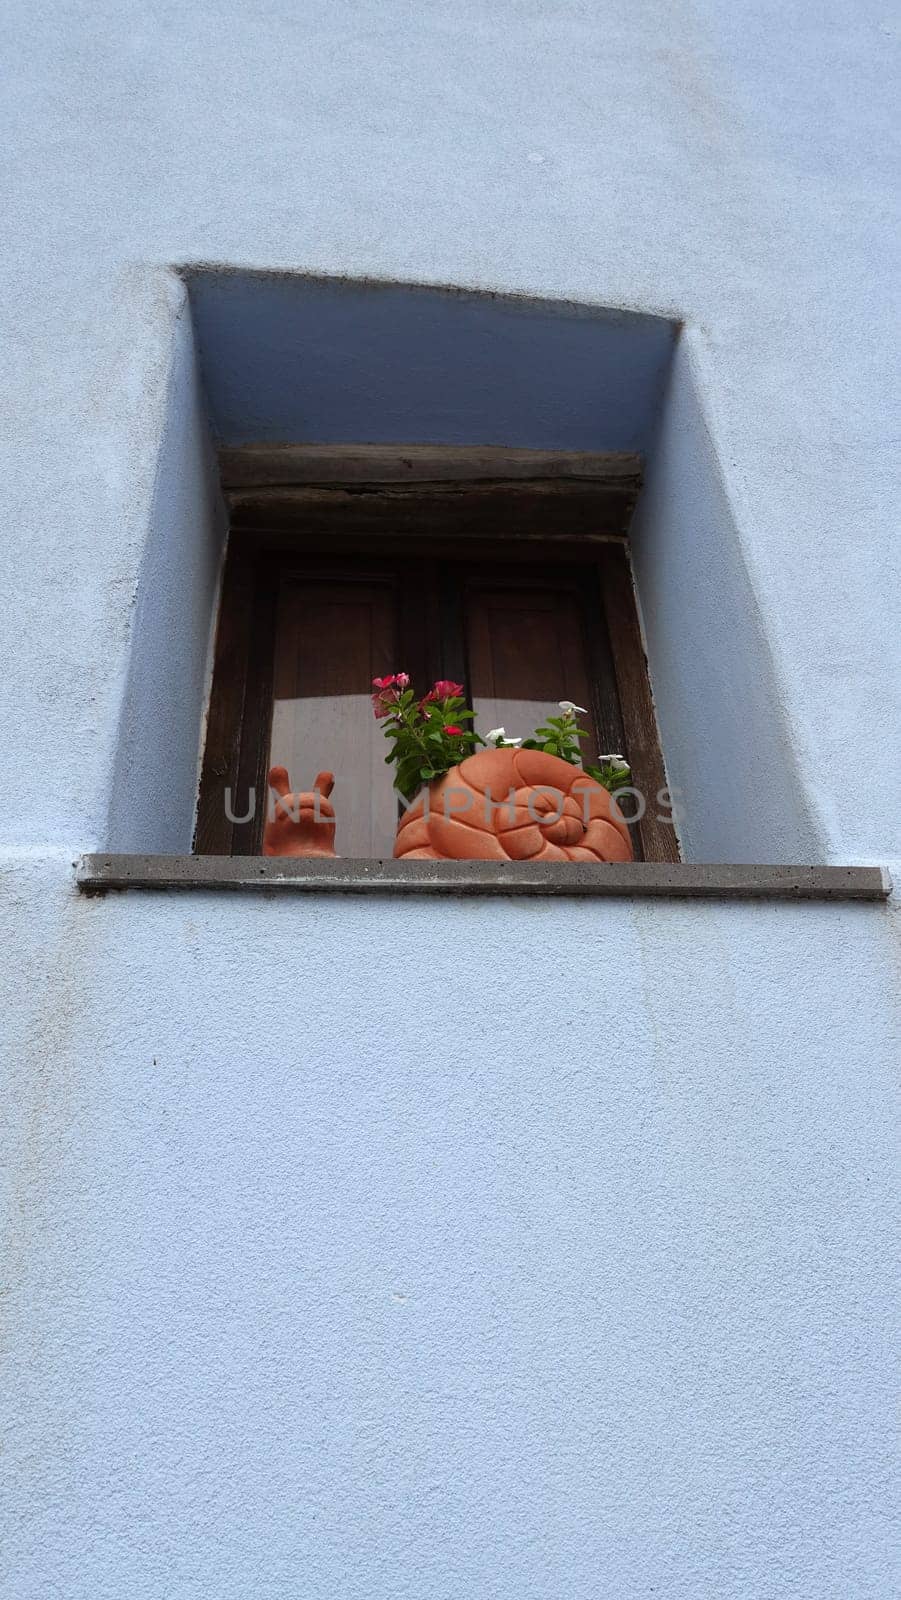 Posada, Italy, August 1 2021. A terracotta snail on a window sill during a summer day.